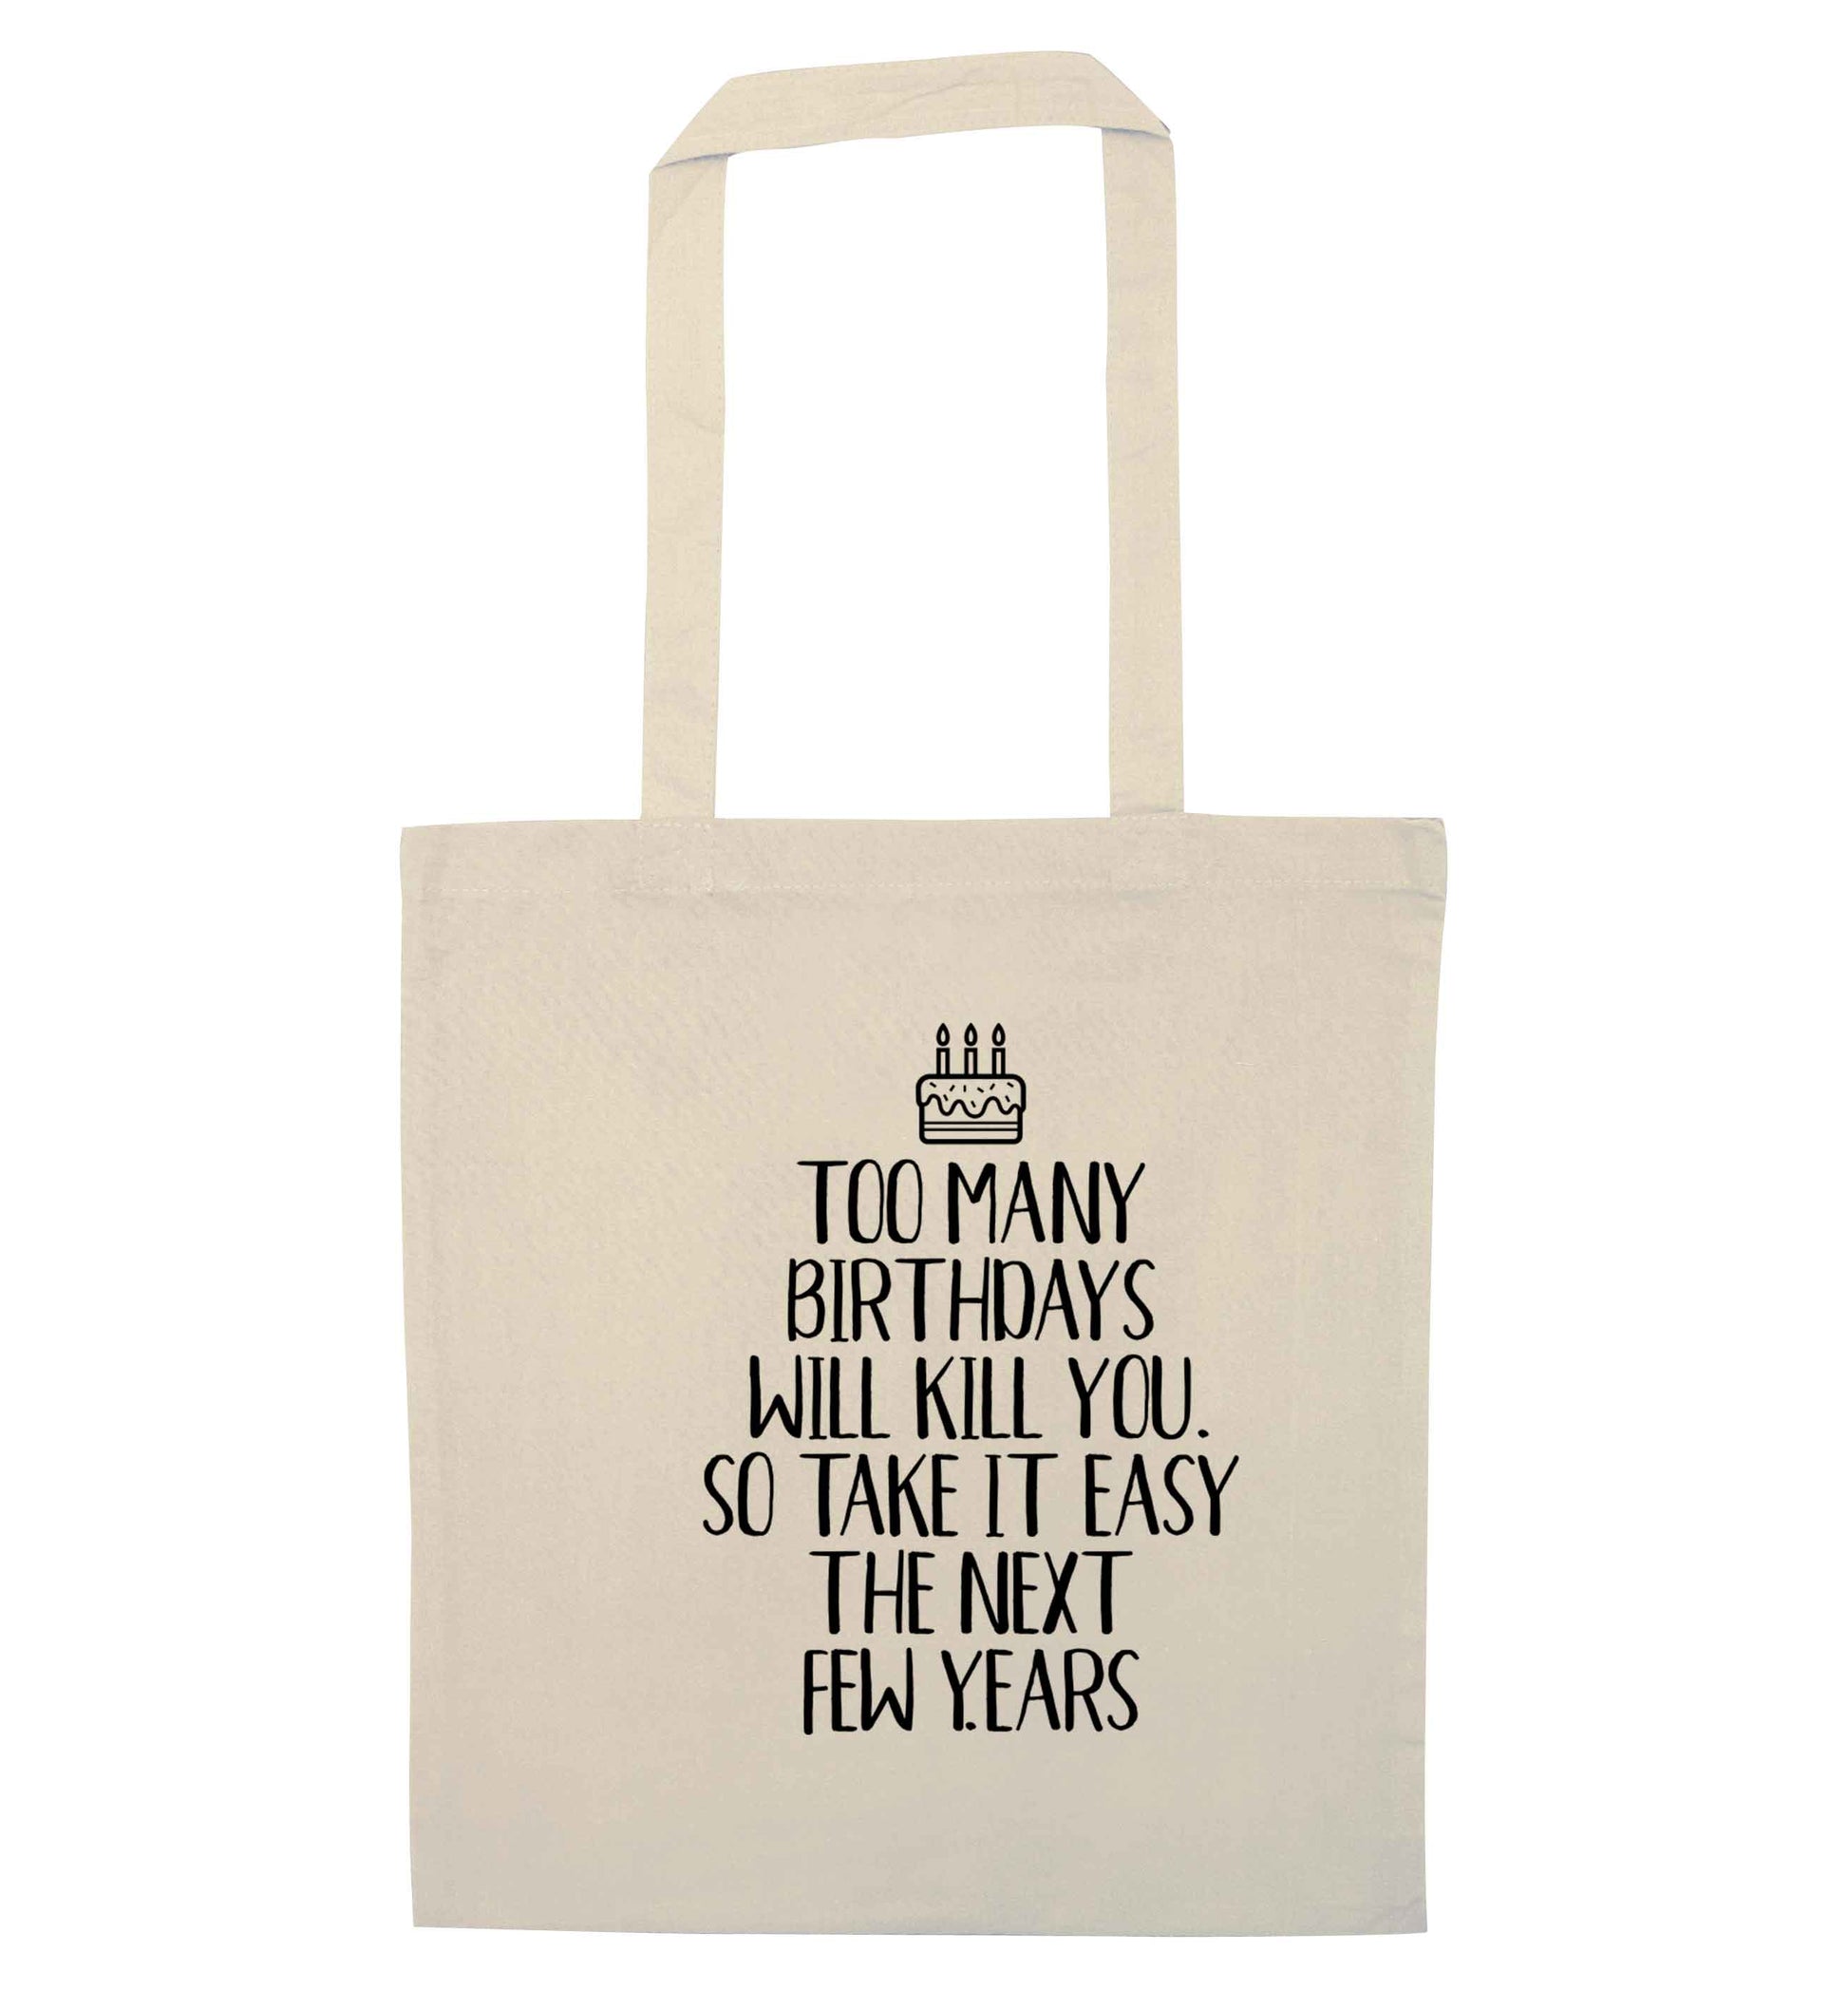 Too many birthdays will kill you so take it easy natural tote bag